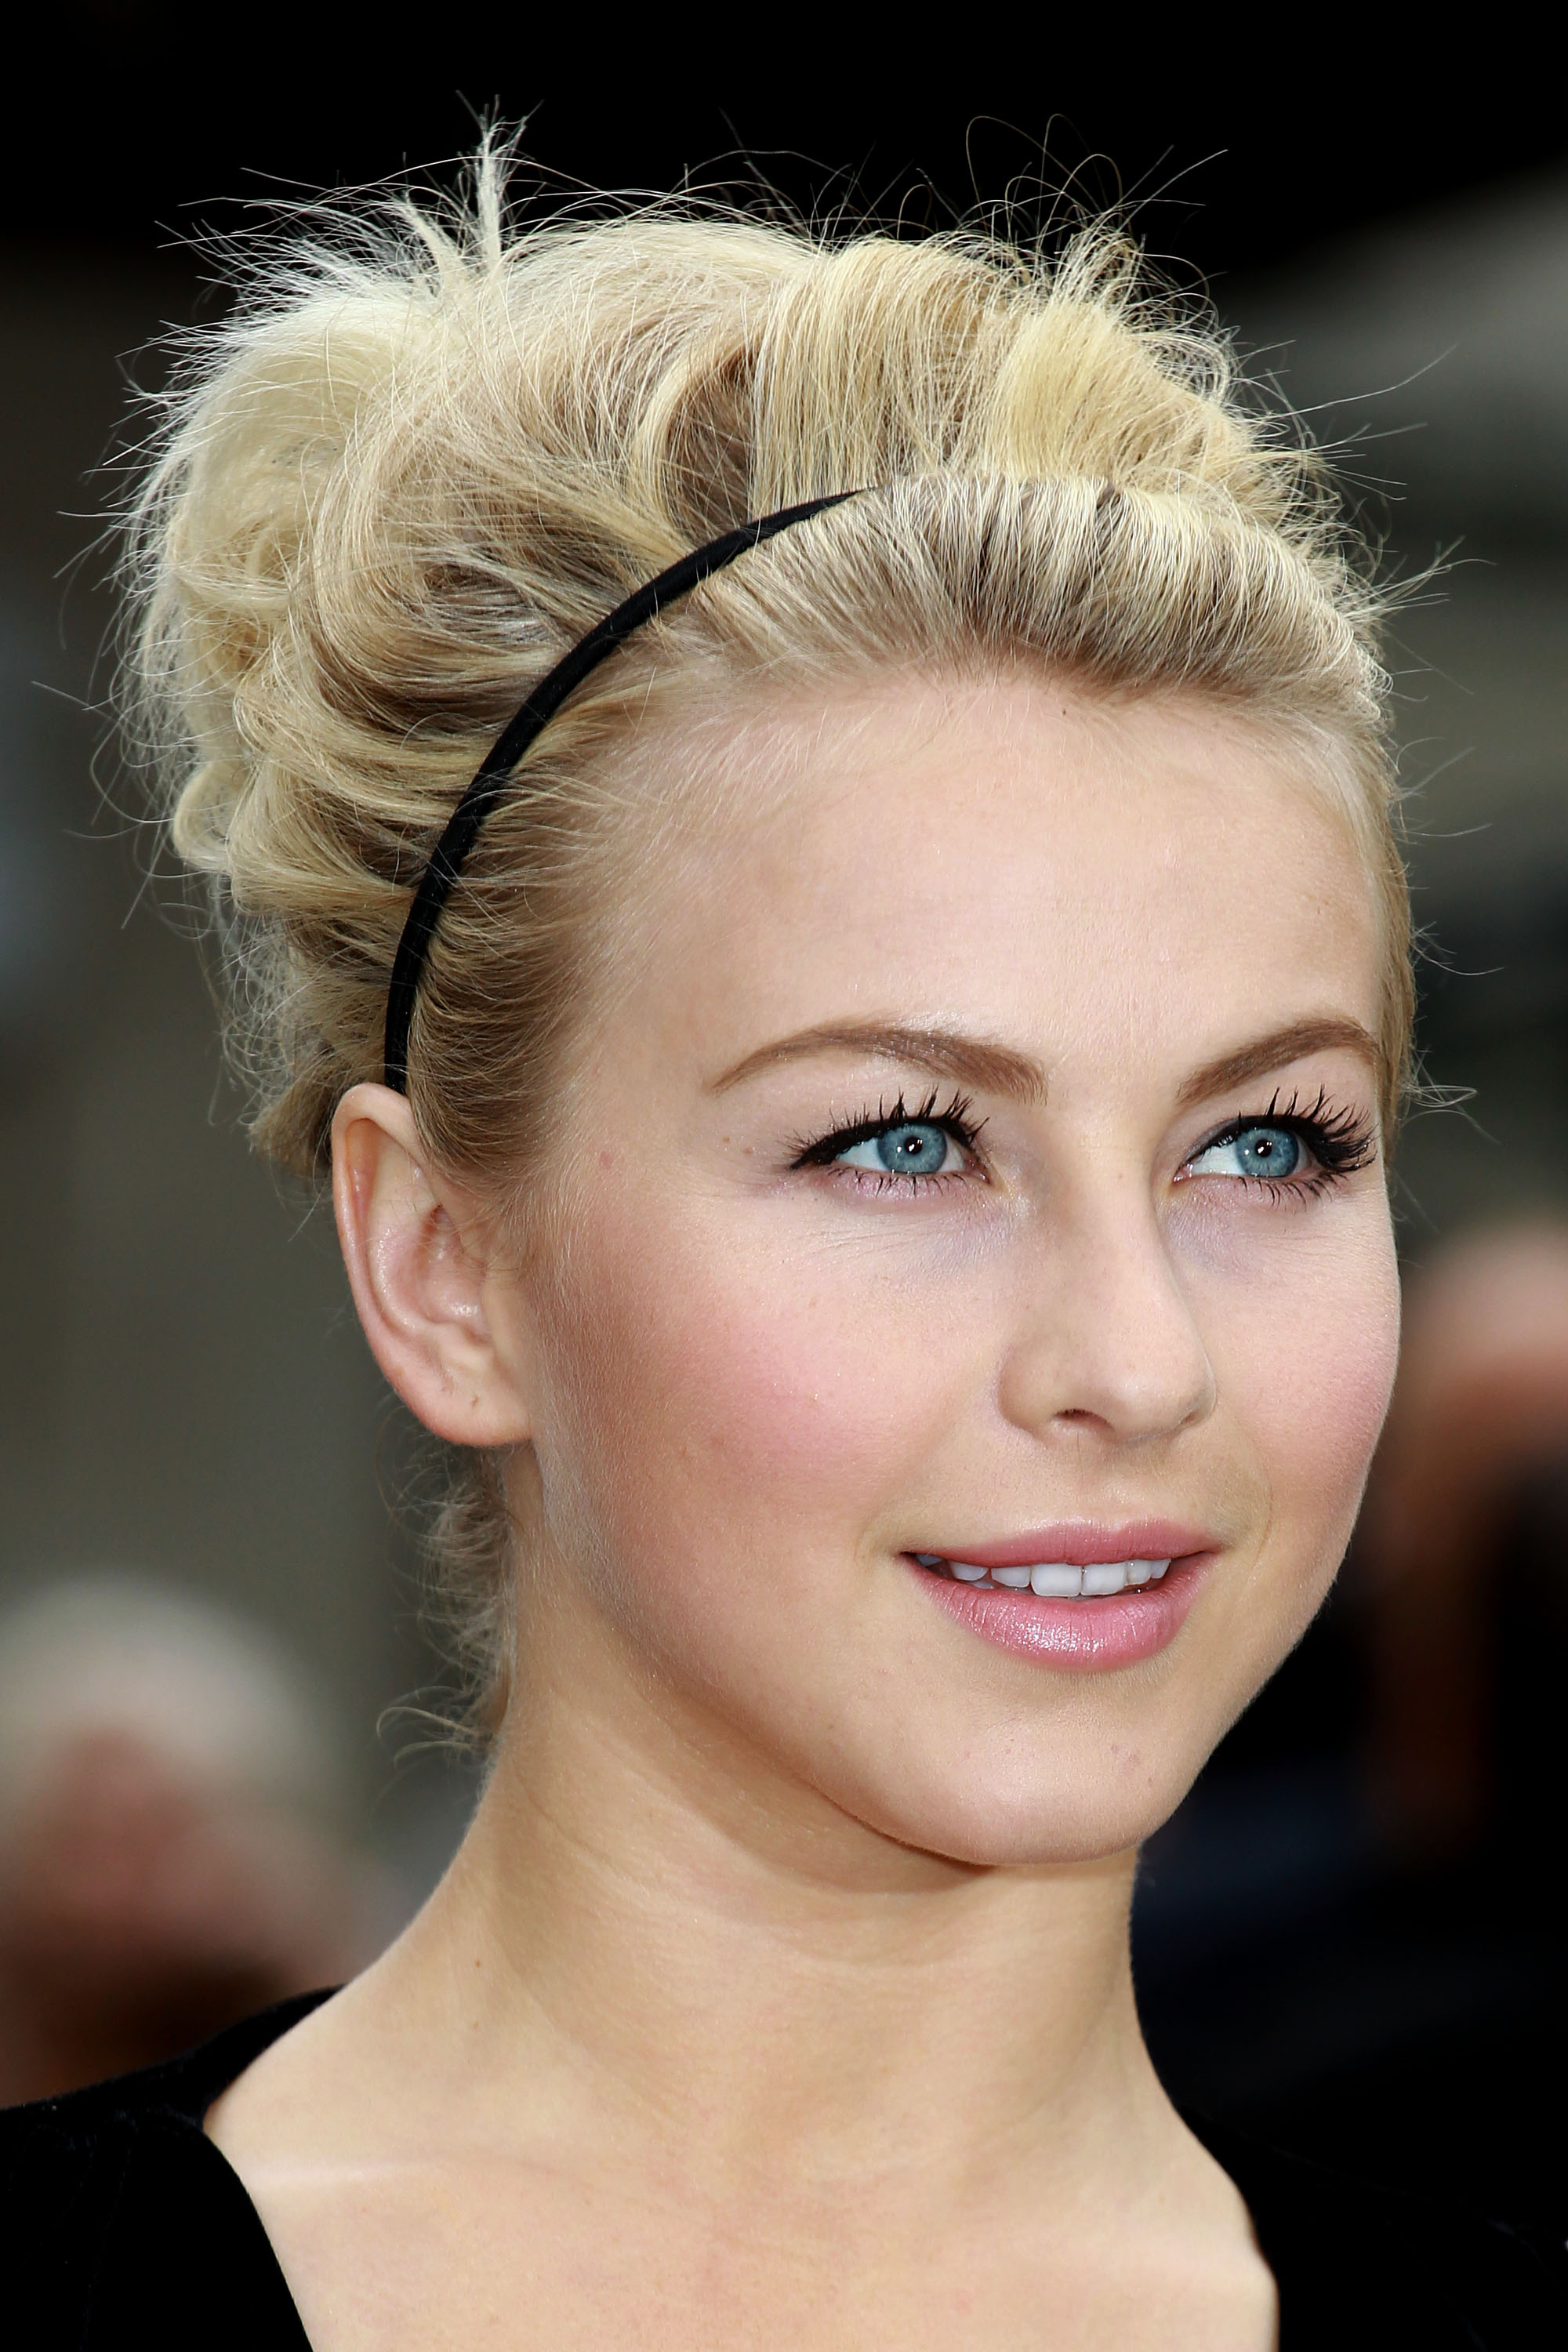 Easy Red Carpet Hairstyles You Can Do in 5 Minutes | StyleCaster